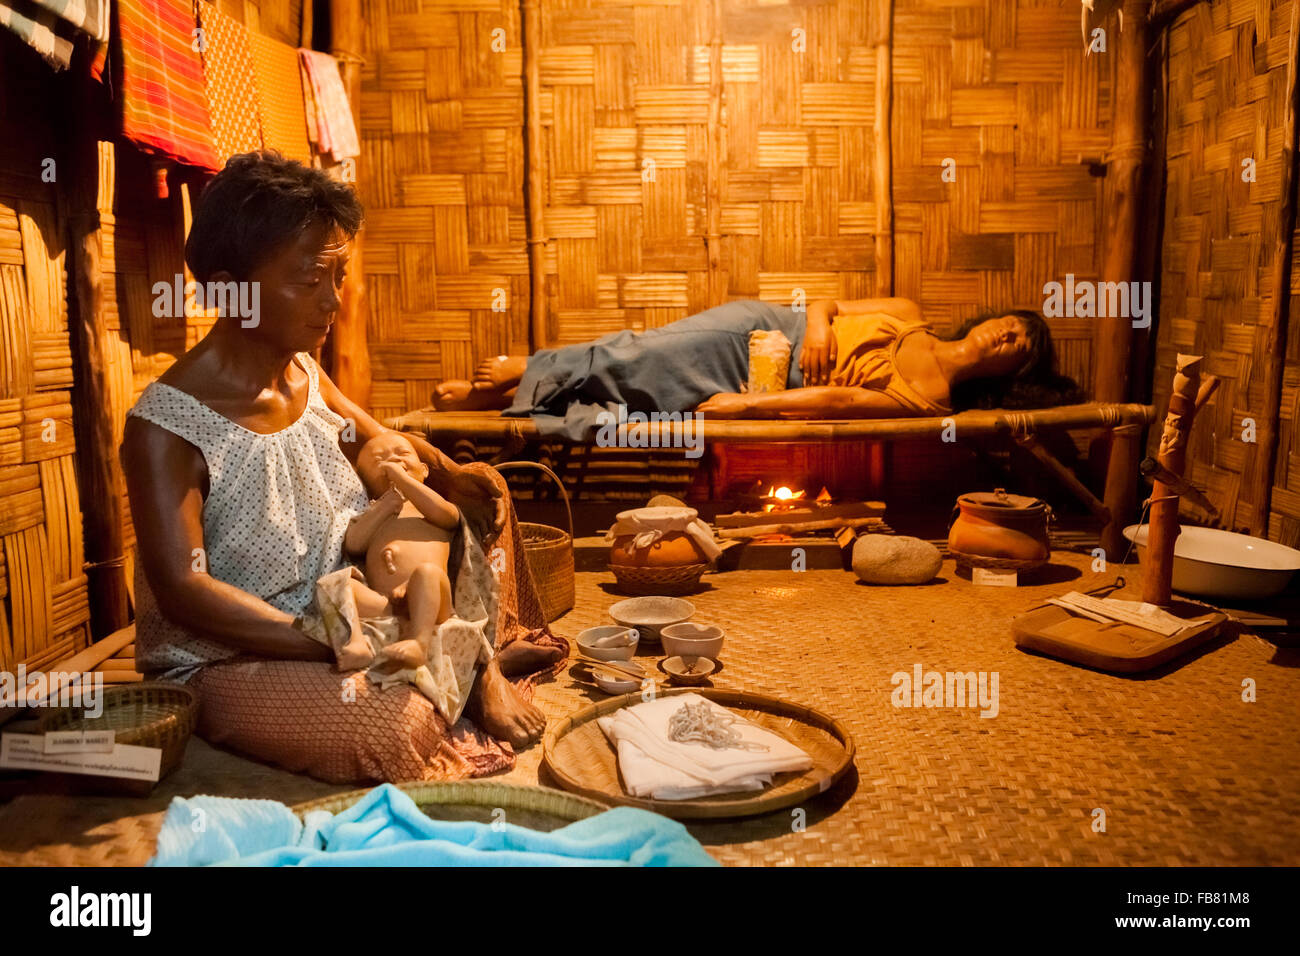 Life-size diorama with scene of childbirth. The mother lies with firebox below bamboo bed to keep her warm. Stock Photo